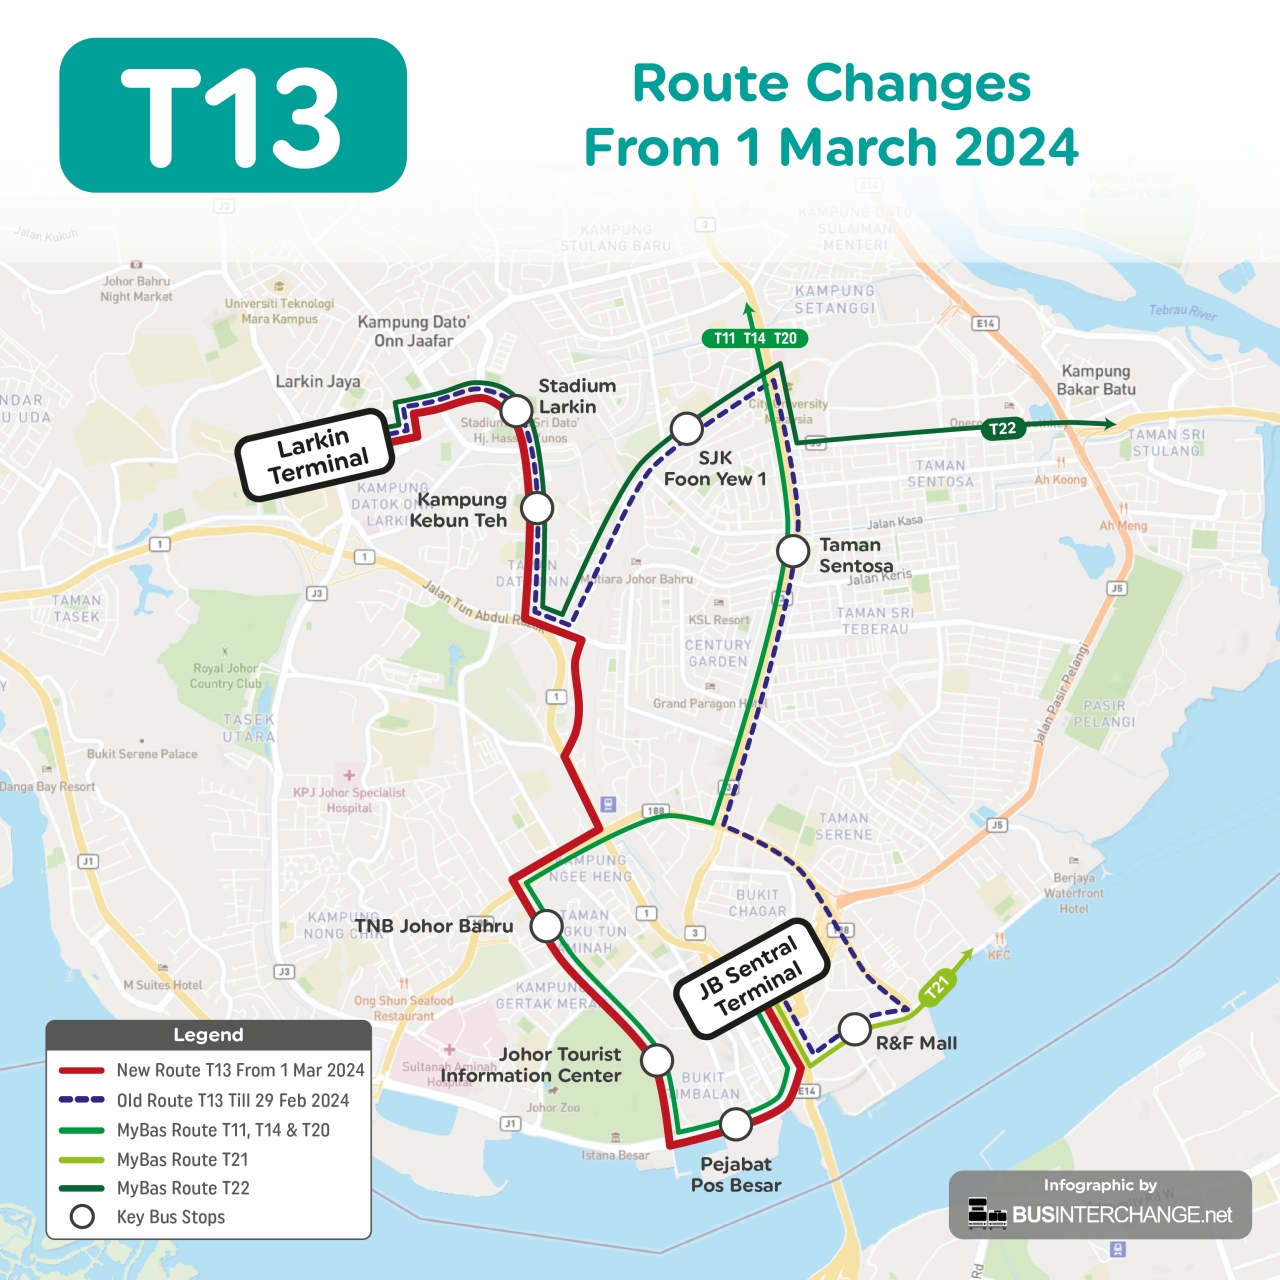 myBas Johor Bahru Route T13 shortened routing from 1 March 2024